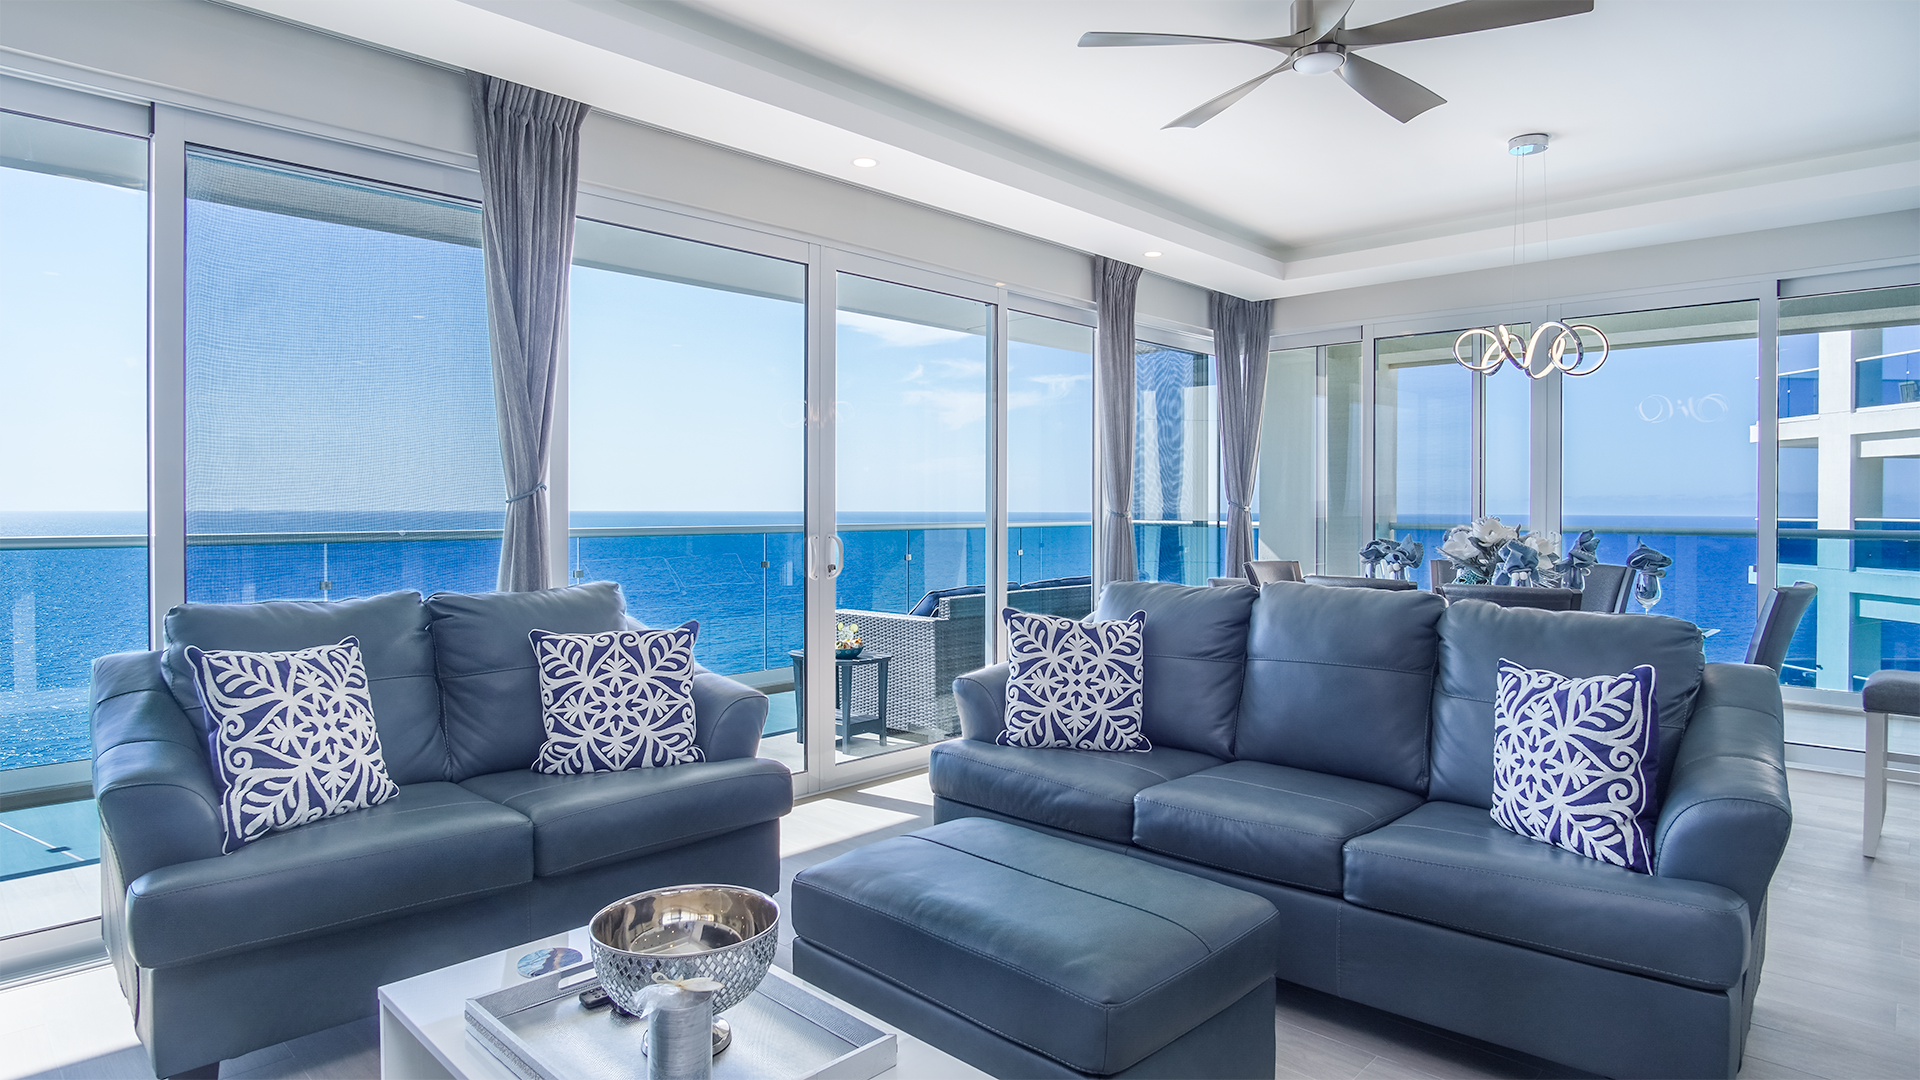 The living room features leather sofas, with tons of beautiful ocean sunlight pouring in.